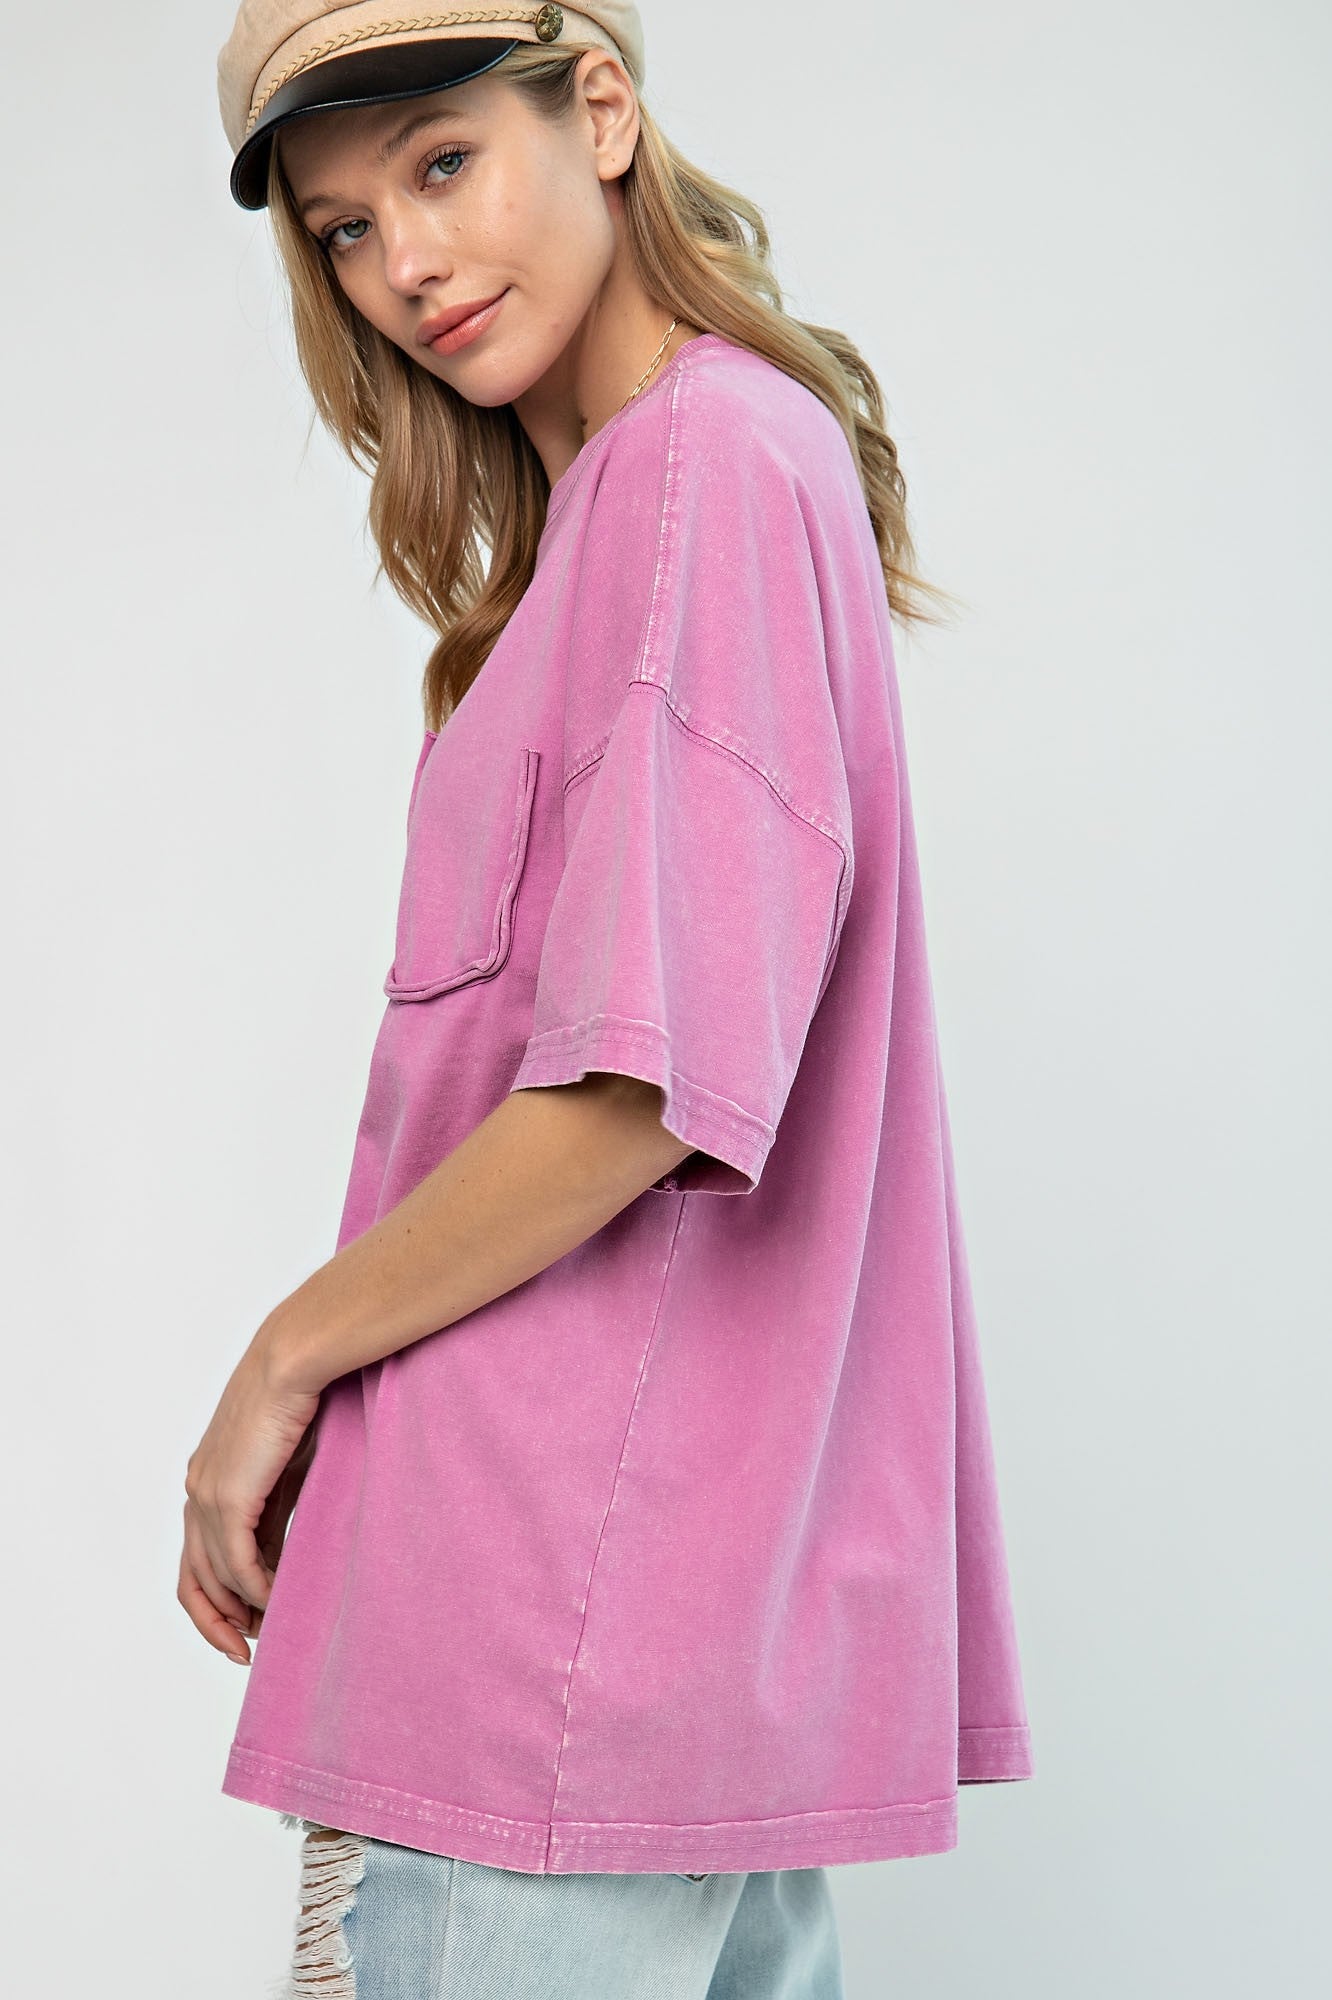 Easel Short Sleeve Mineral Wash Tunic Top in Barbie Pink ON ORDER ...